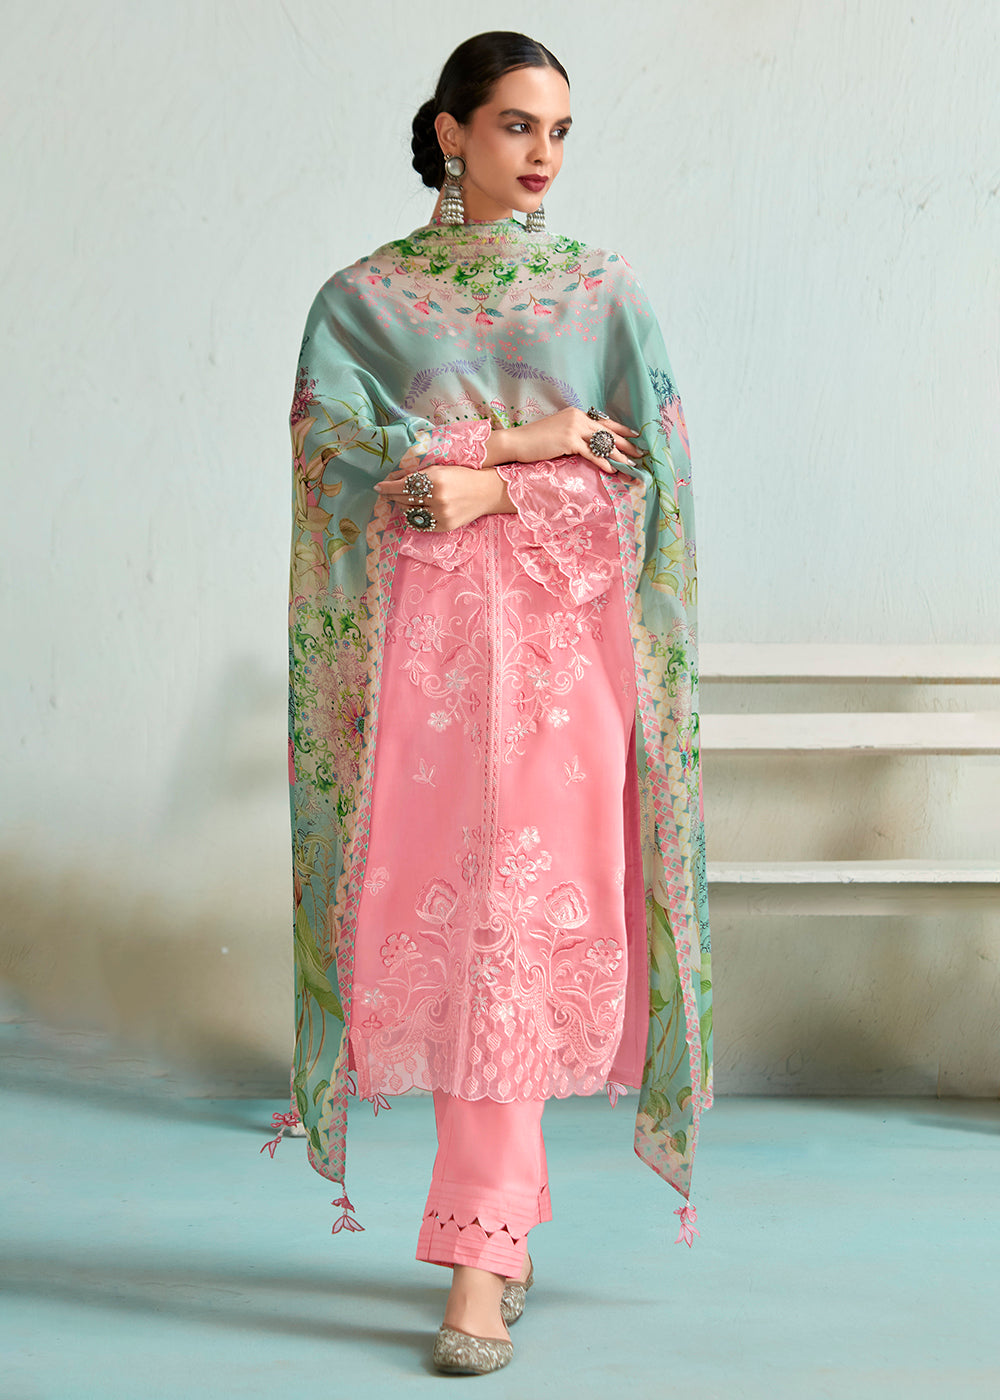 Buy Now Pretty Pink Pure Muslin Resham Embroidered Salwar Suit Online in USA, UK, Canada, Germany, Australia & Worldwide at Empress Clothing.